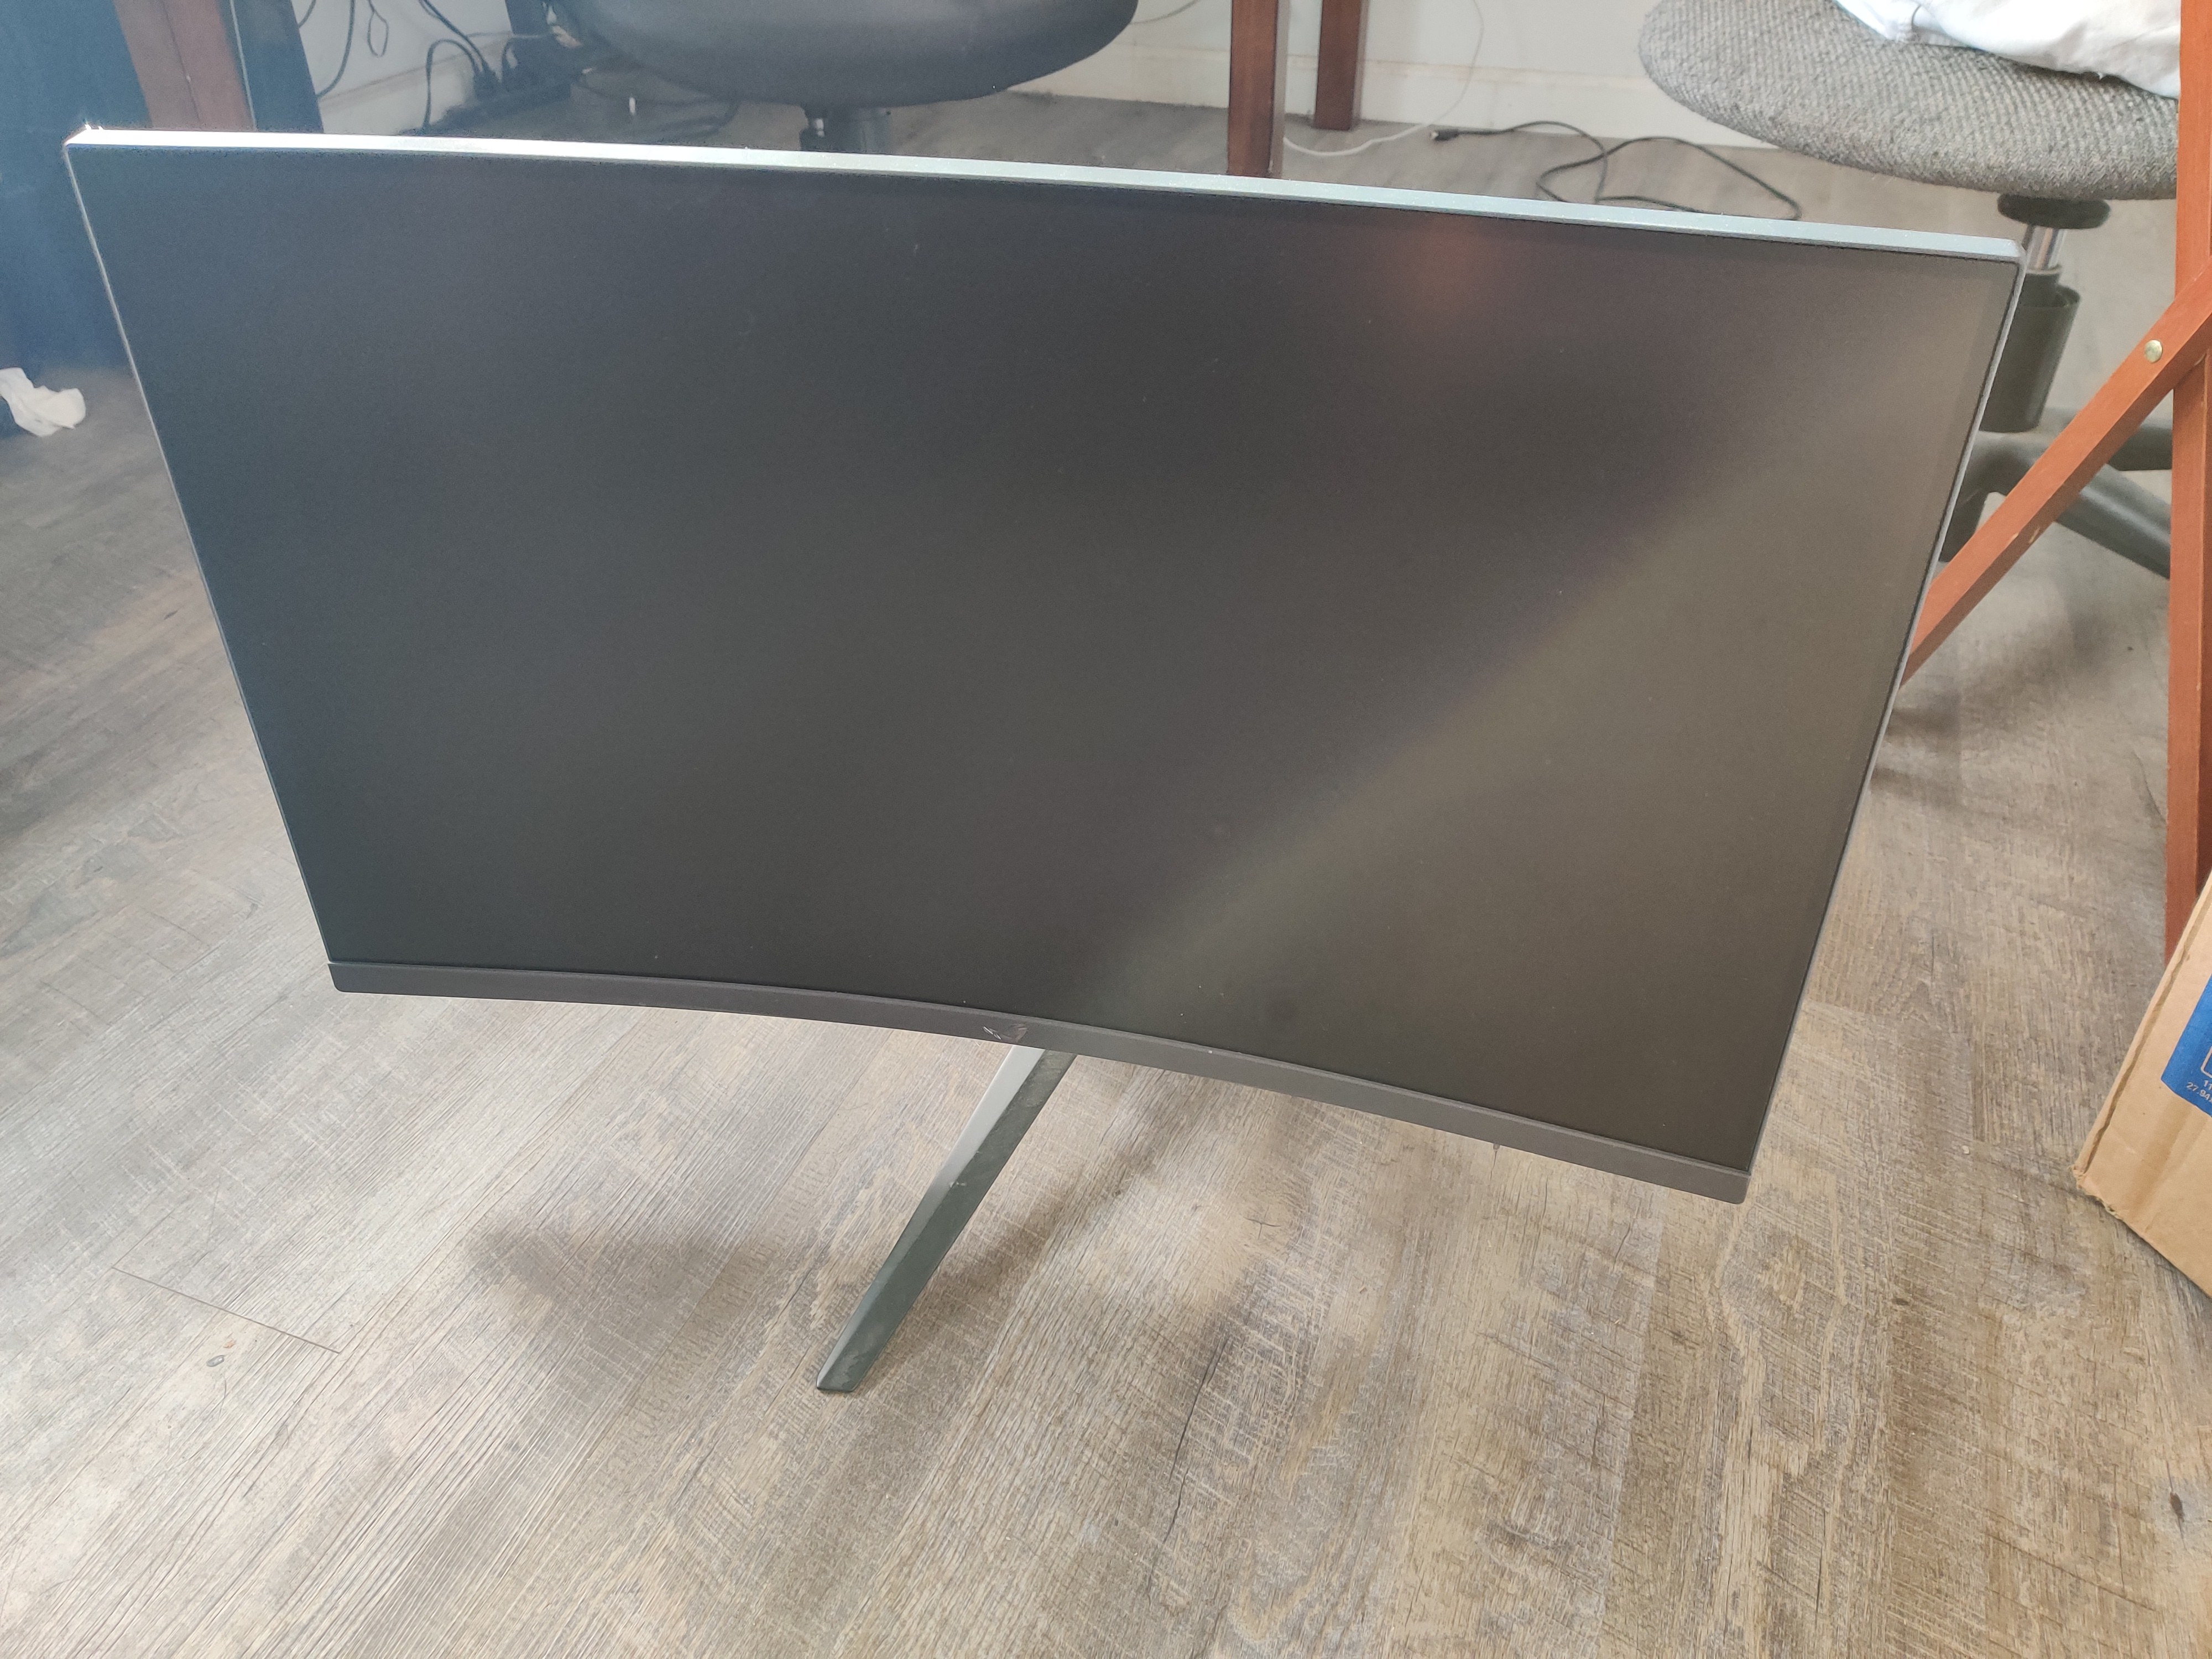 Front of monitor, no damage prior to shipping.